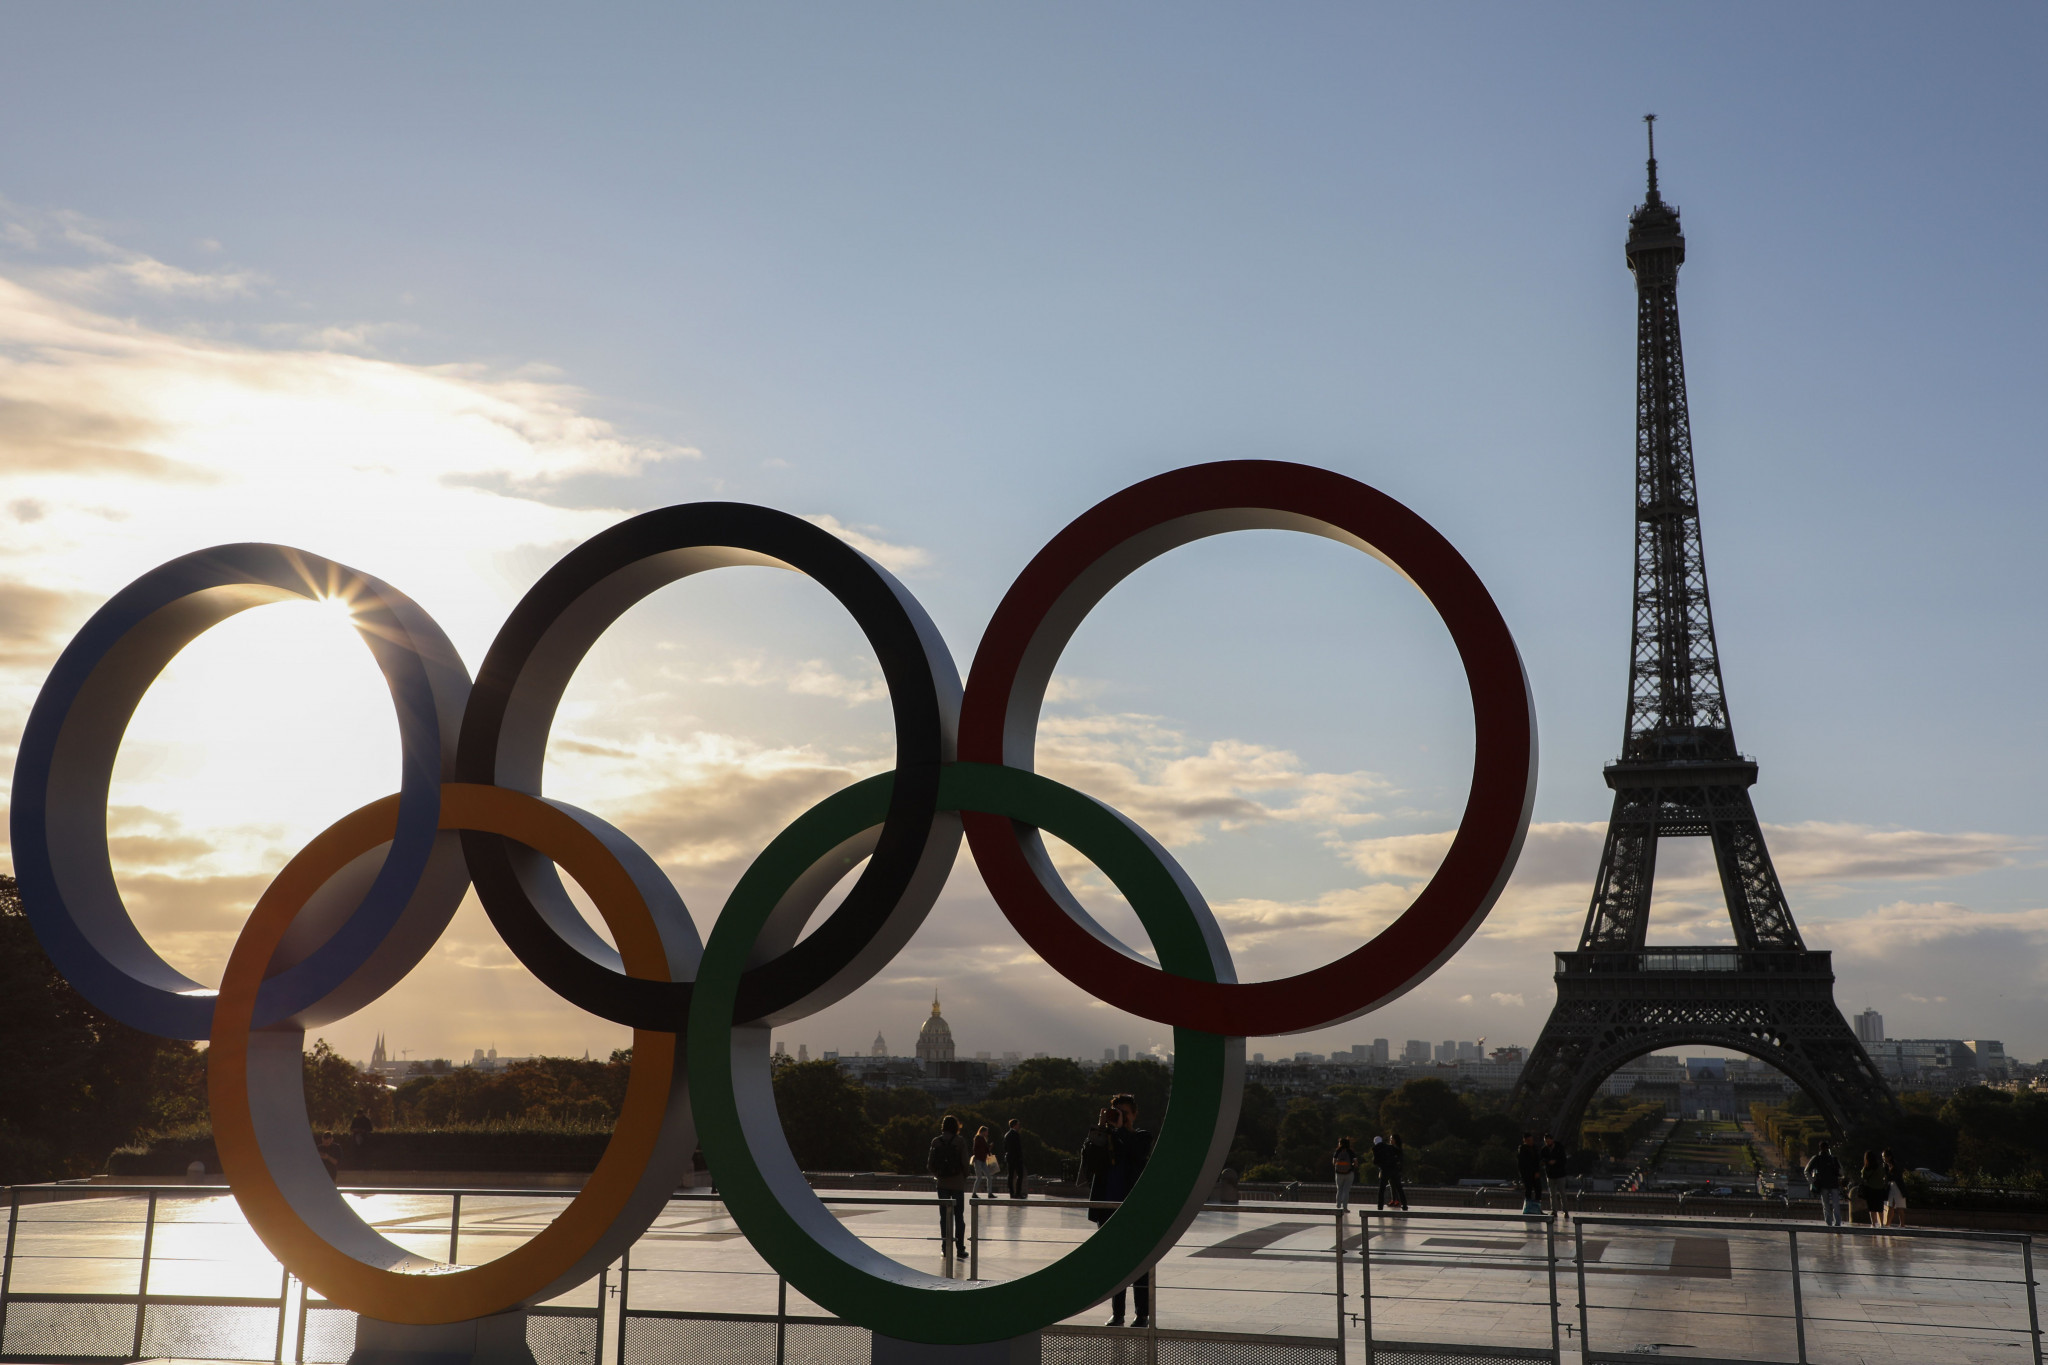 Paris is due to host the Olympics for the first time in 100 years in 2024 ©Getty Images